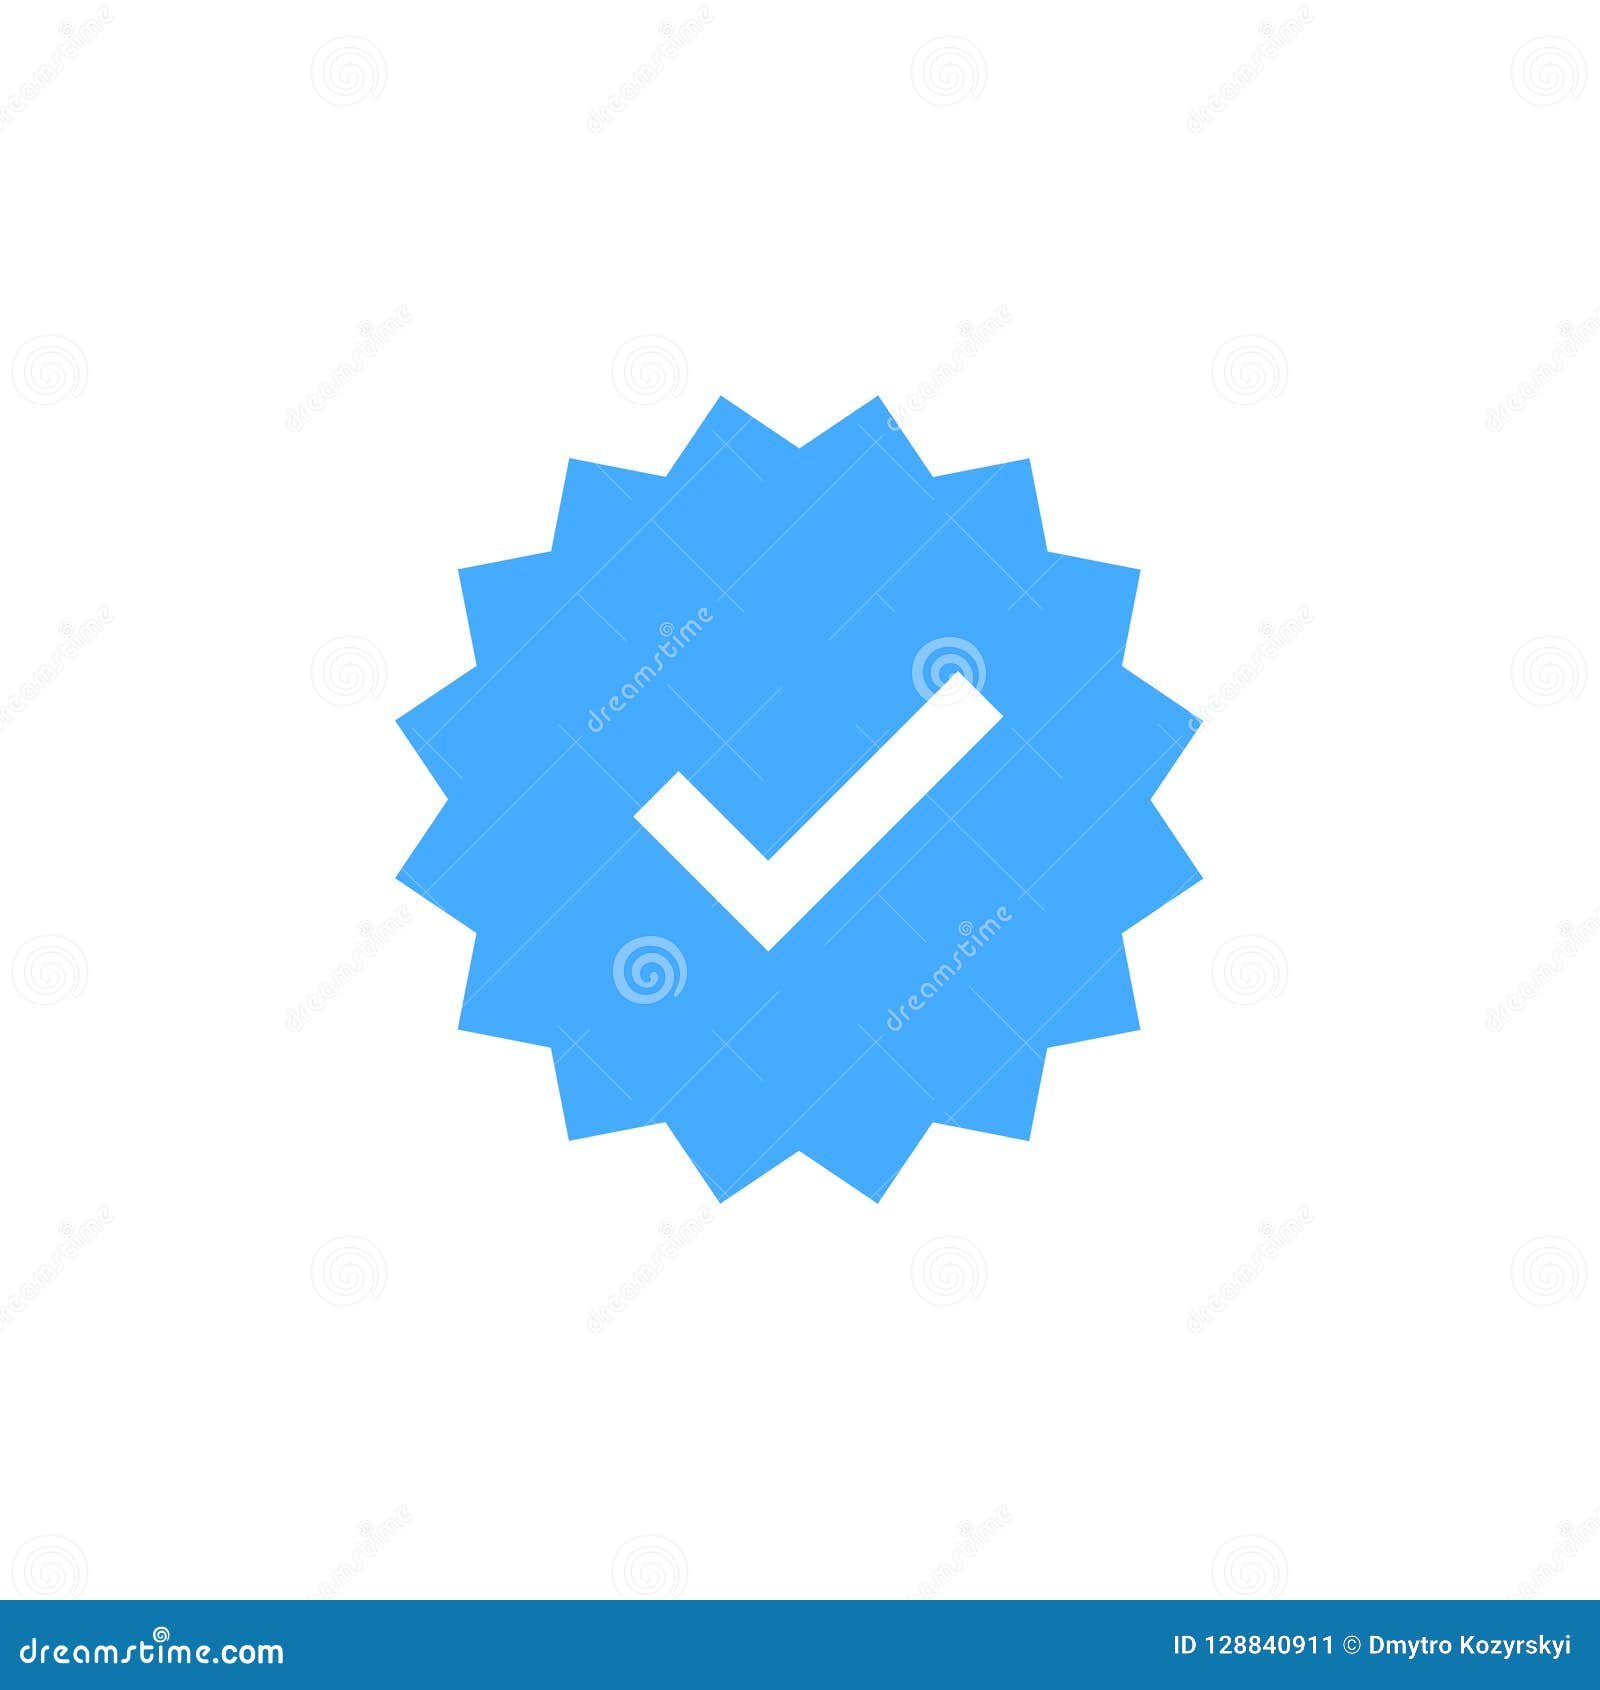 https://thumbs.dreamstime.com/z/approved-icon-profile-verification-accept-badge-quality-check-mark-sticker-tick-vector-illustration-128840911.jpg